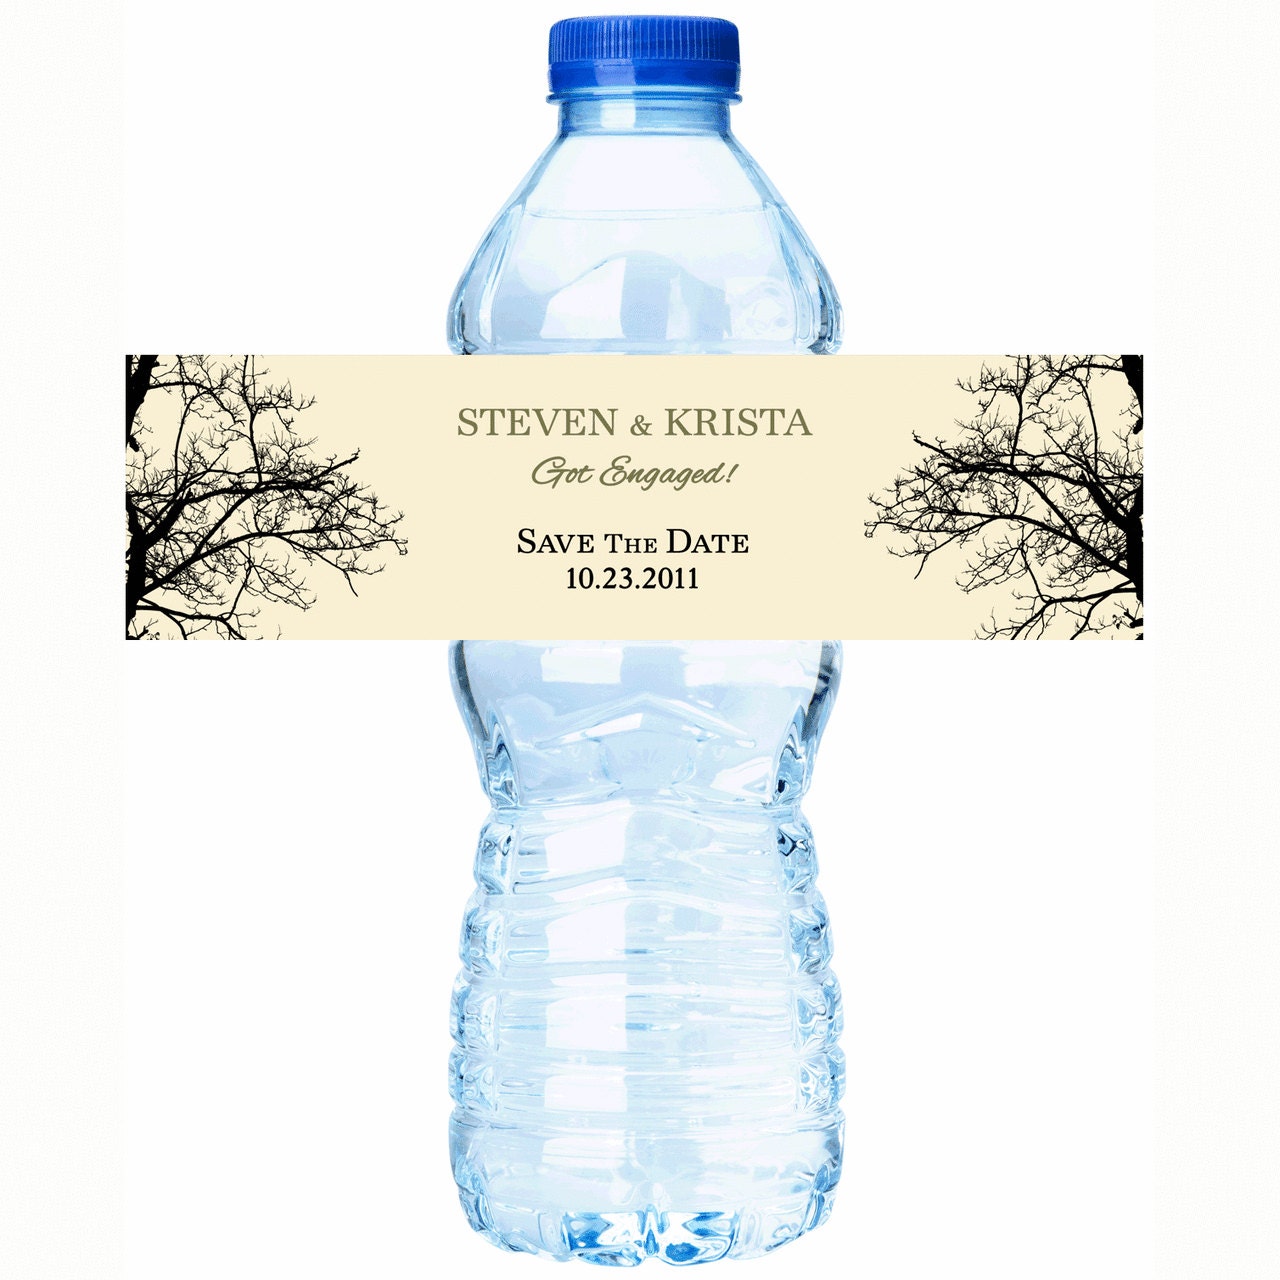 30 Branches Personalized Save The Date Water Bottle Labels - Select Quantity You Need Below in Pricing & Quantity Option Tab"